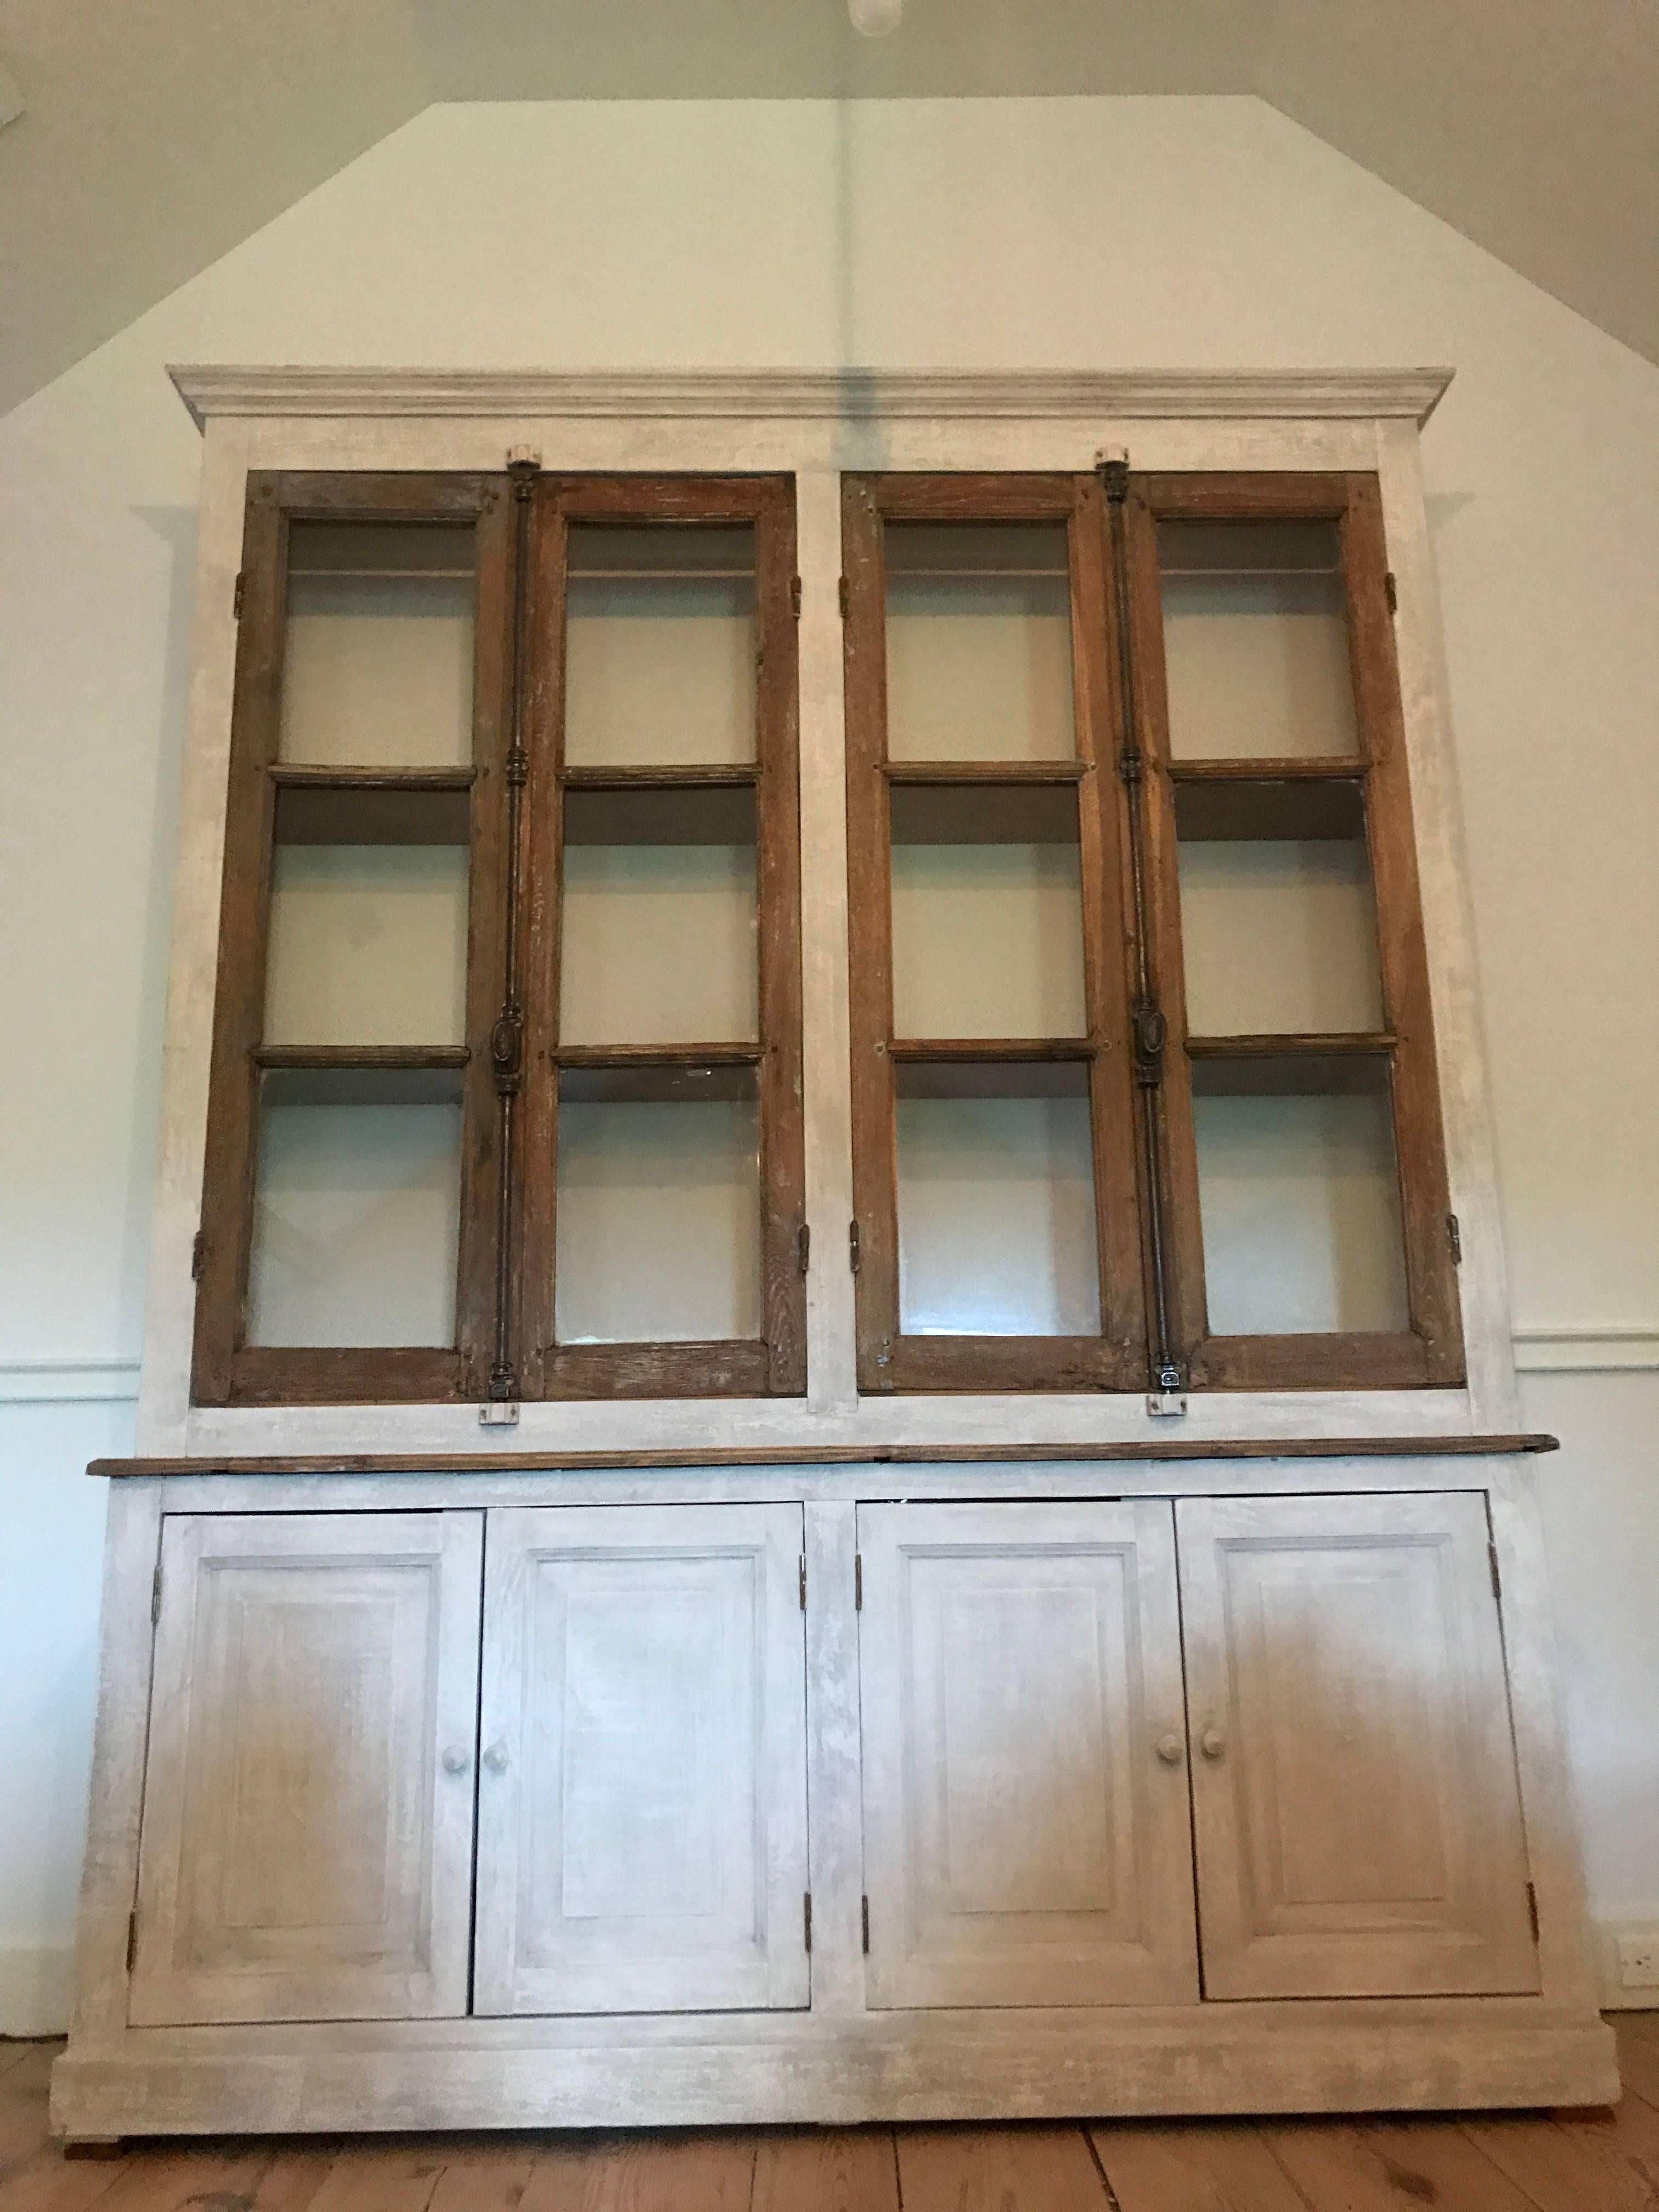 A two part French Provincial cabinet. Lower compartment have two double doors and interior shelves and the upper portion with shelving closed by two pairs of antique doors. Wonderful custom made piece repurposing antique hardware and doors. 
